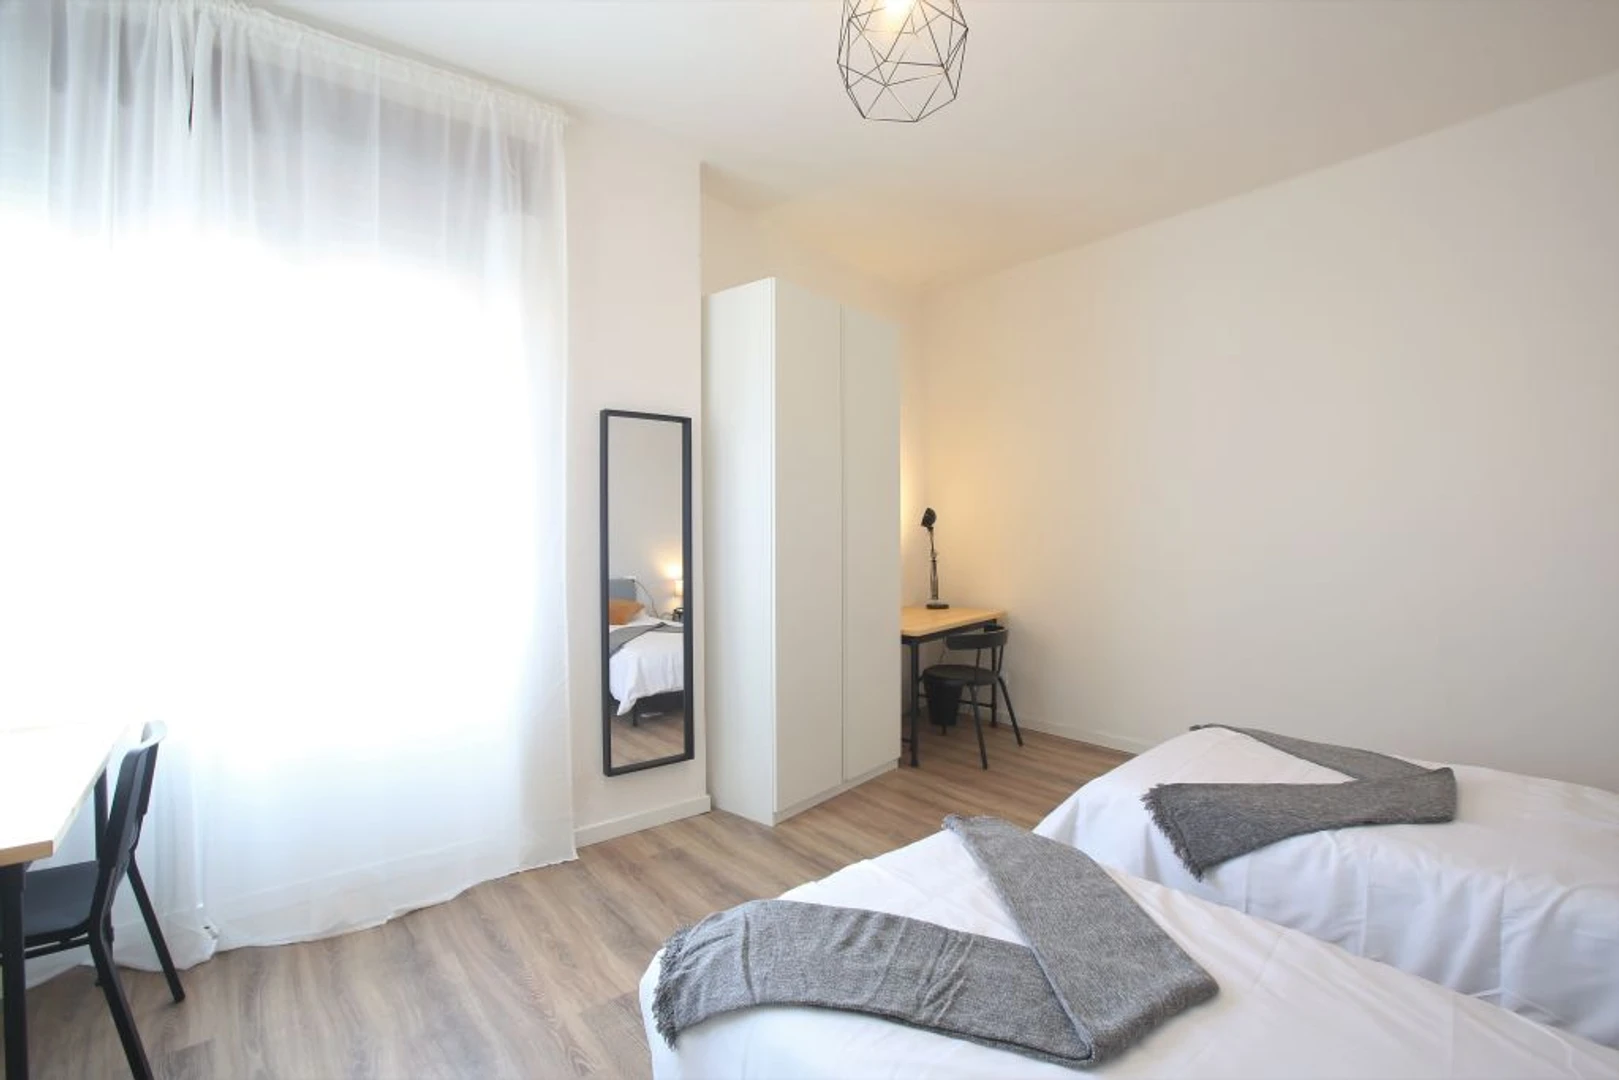 Renting rooms by the month in Modena